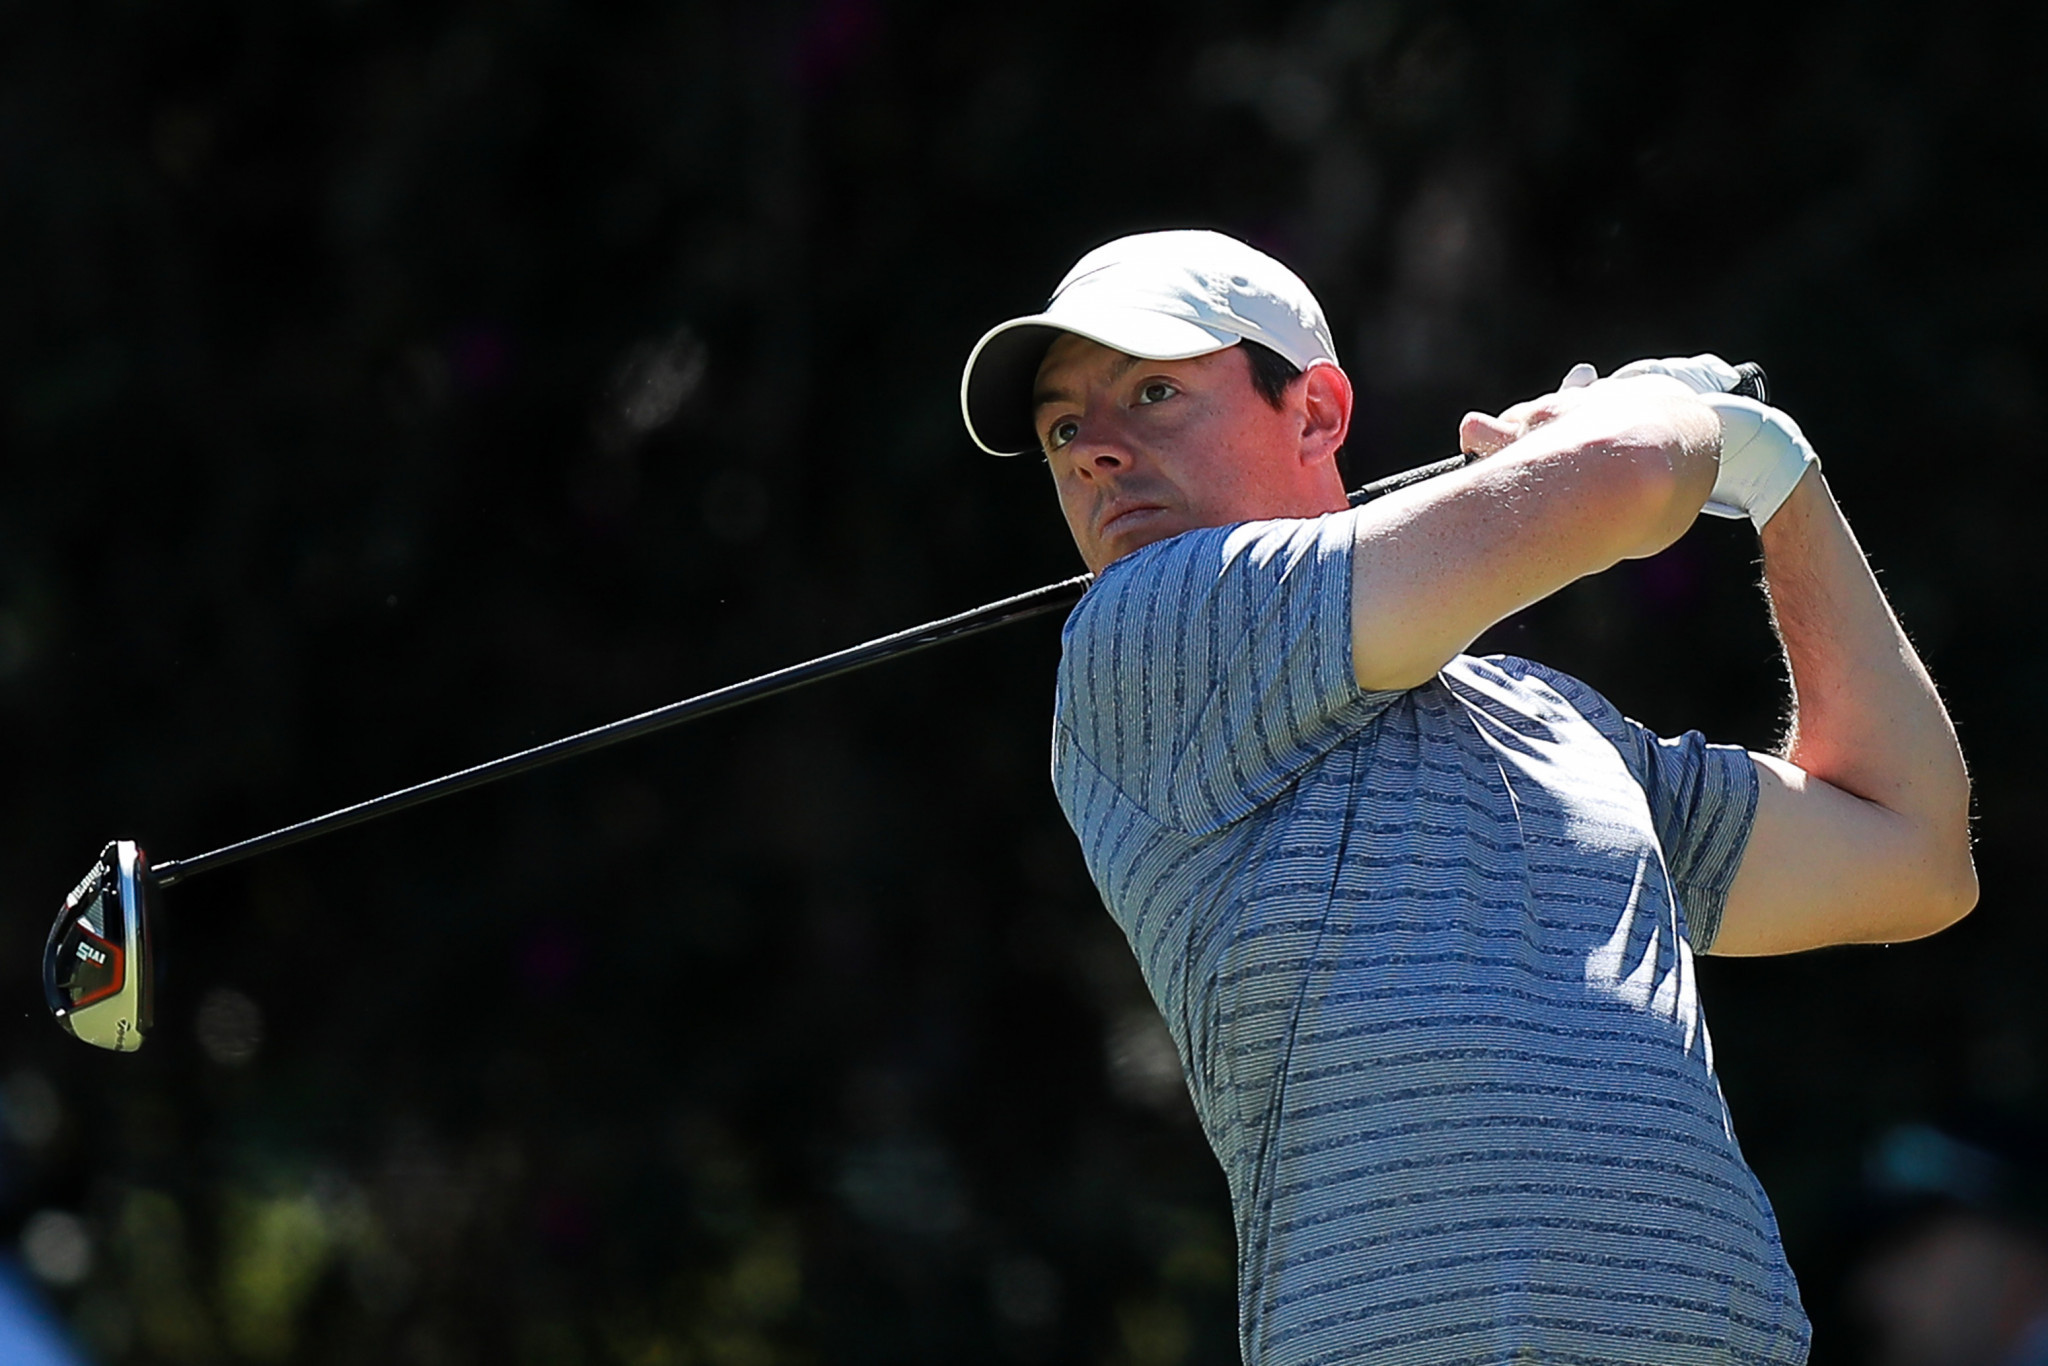 McIlroy establishes one-shot lead after opening day of WGC-Mexico Championship